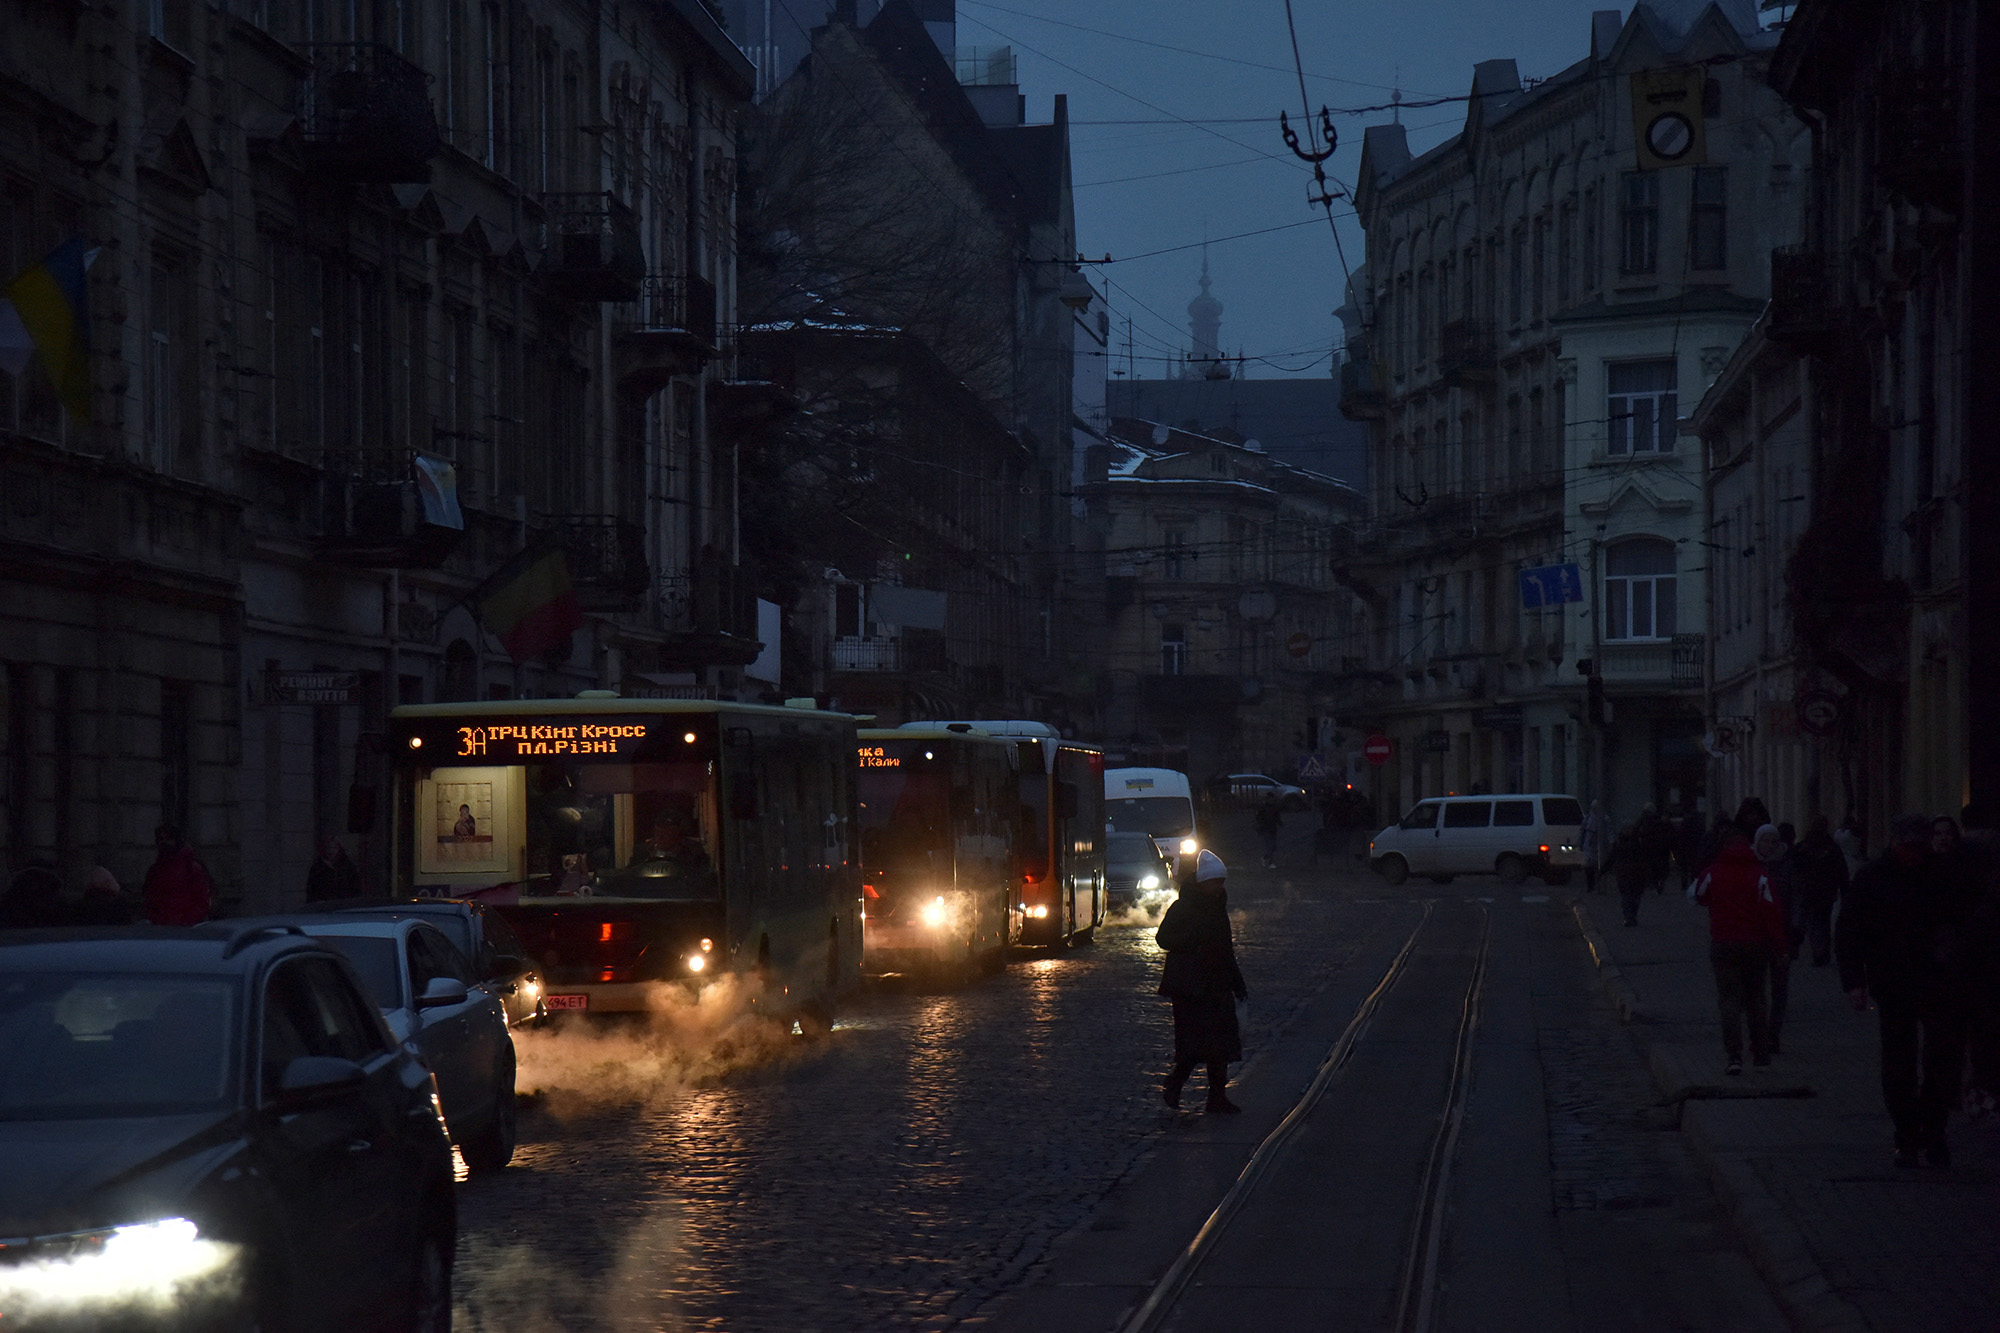 Lviv city centre without electricity after Ukrainian critical civil infrastructure was hit by Russian missile attacks on November 23.